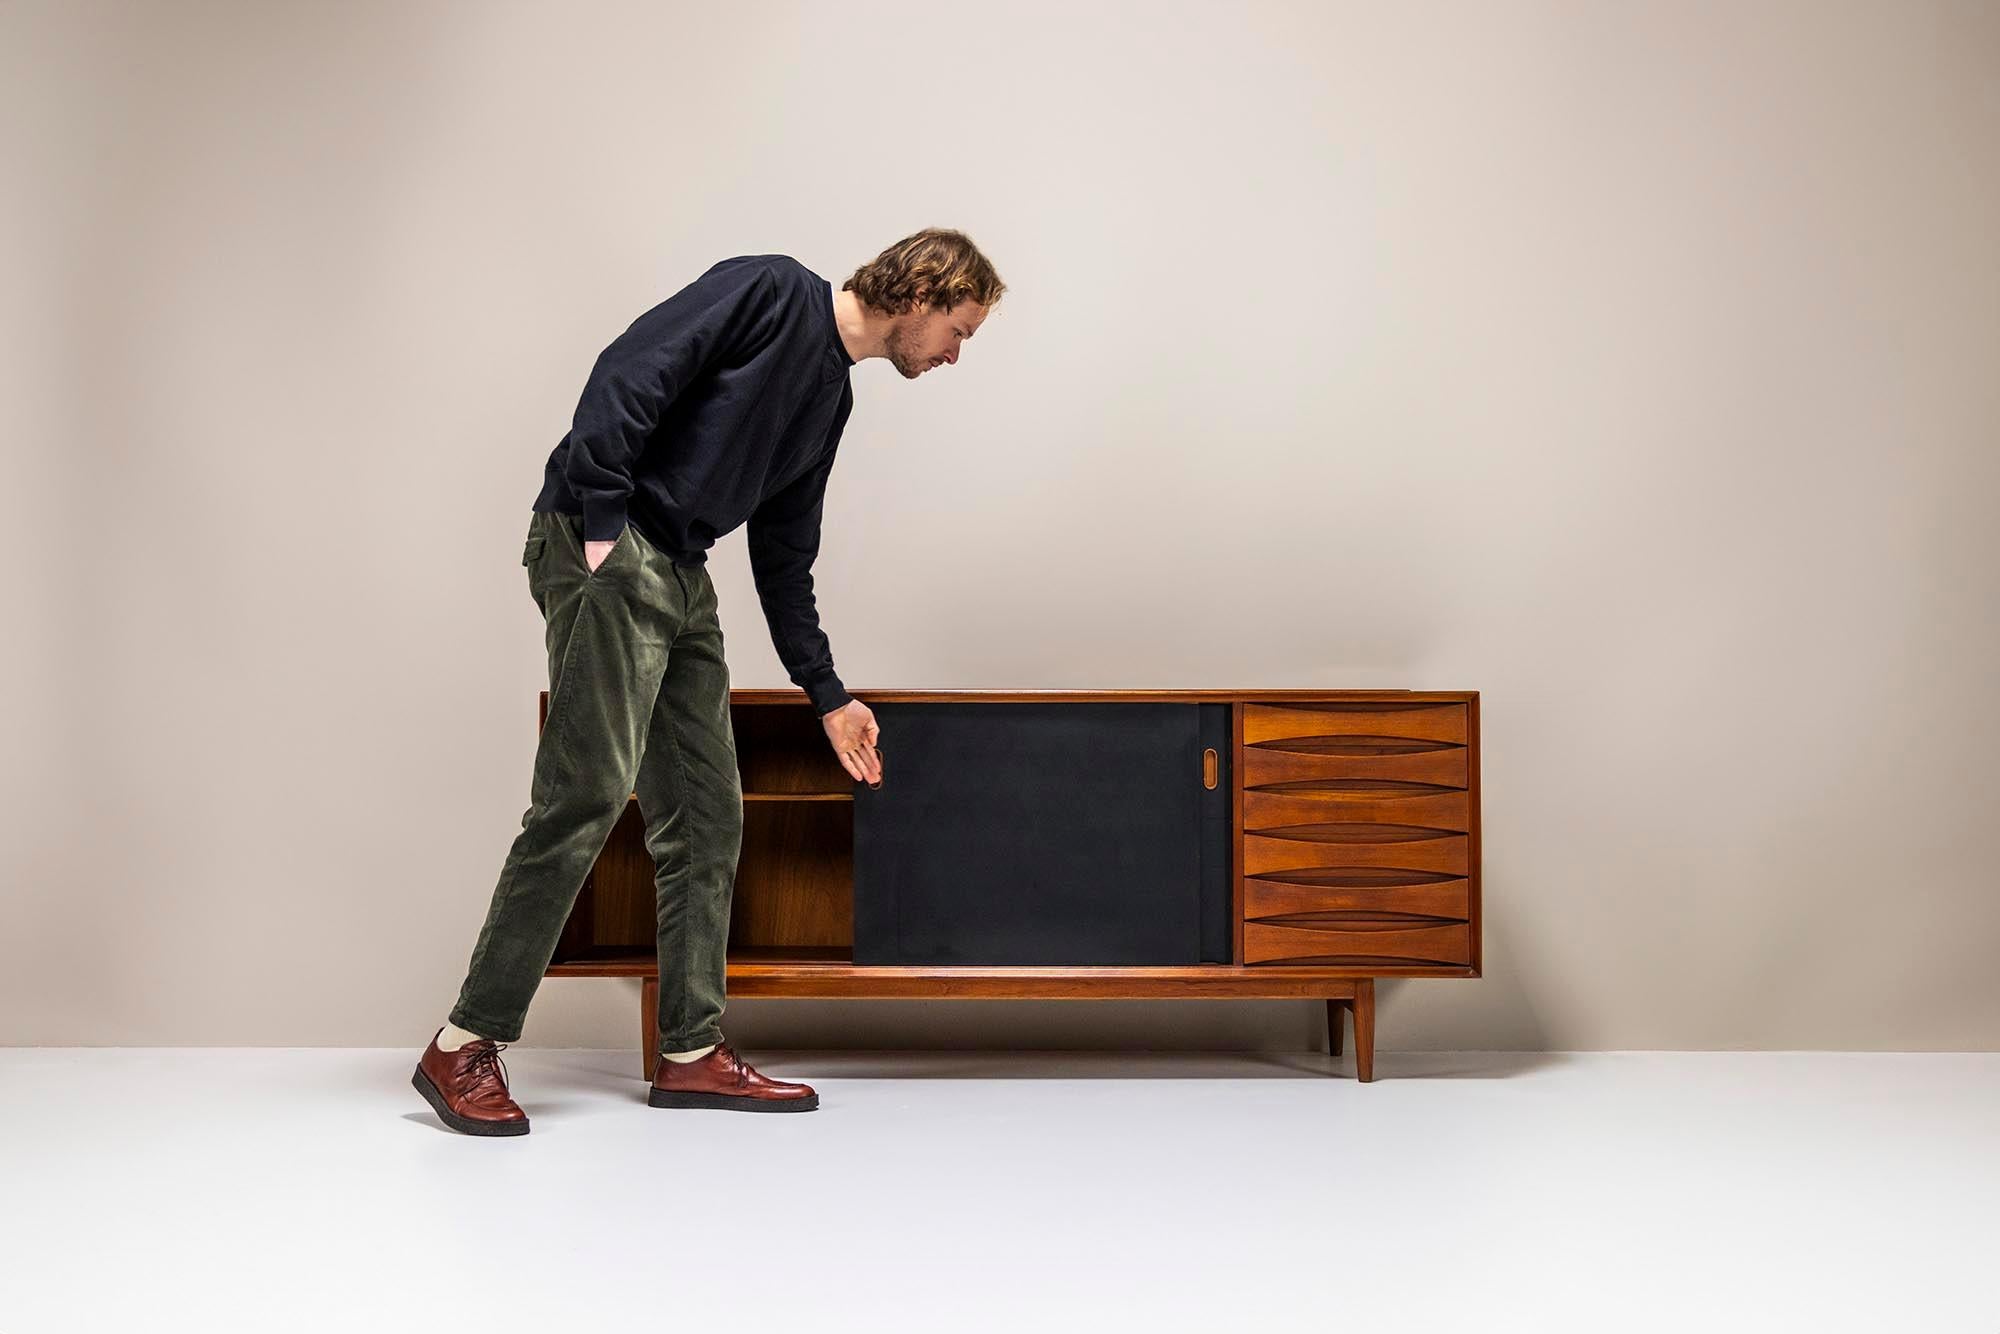 Arne Vodder is one of the great Danes when talking about furniture design. He graduated under the legendary Finn Juhl at the Royal Danish Academy of Fine Arts in Copenhagen and subsequently had a long successful career. His designs were appreciated